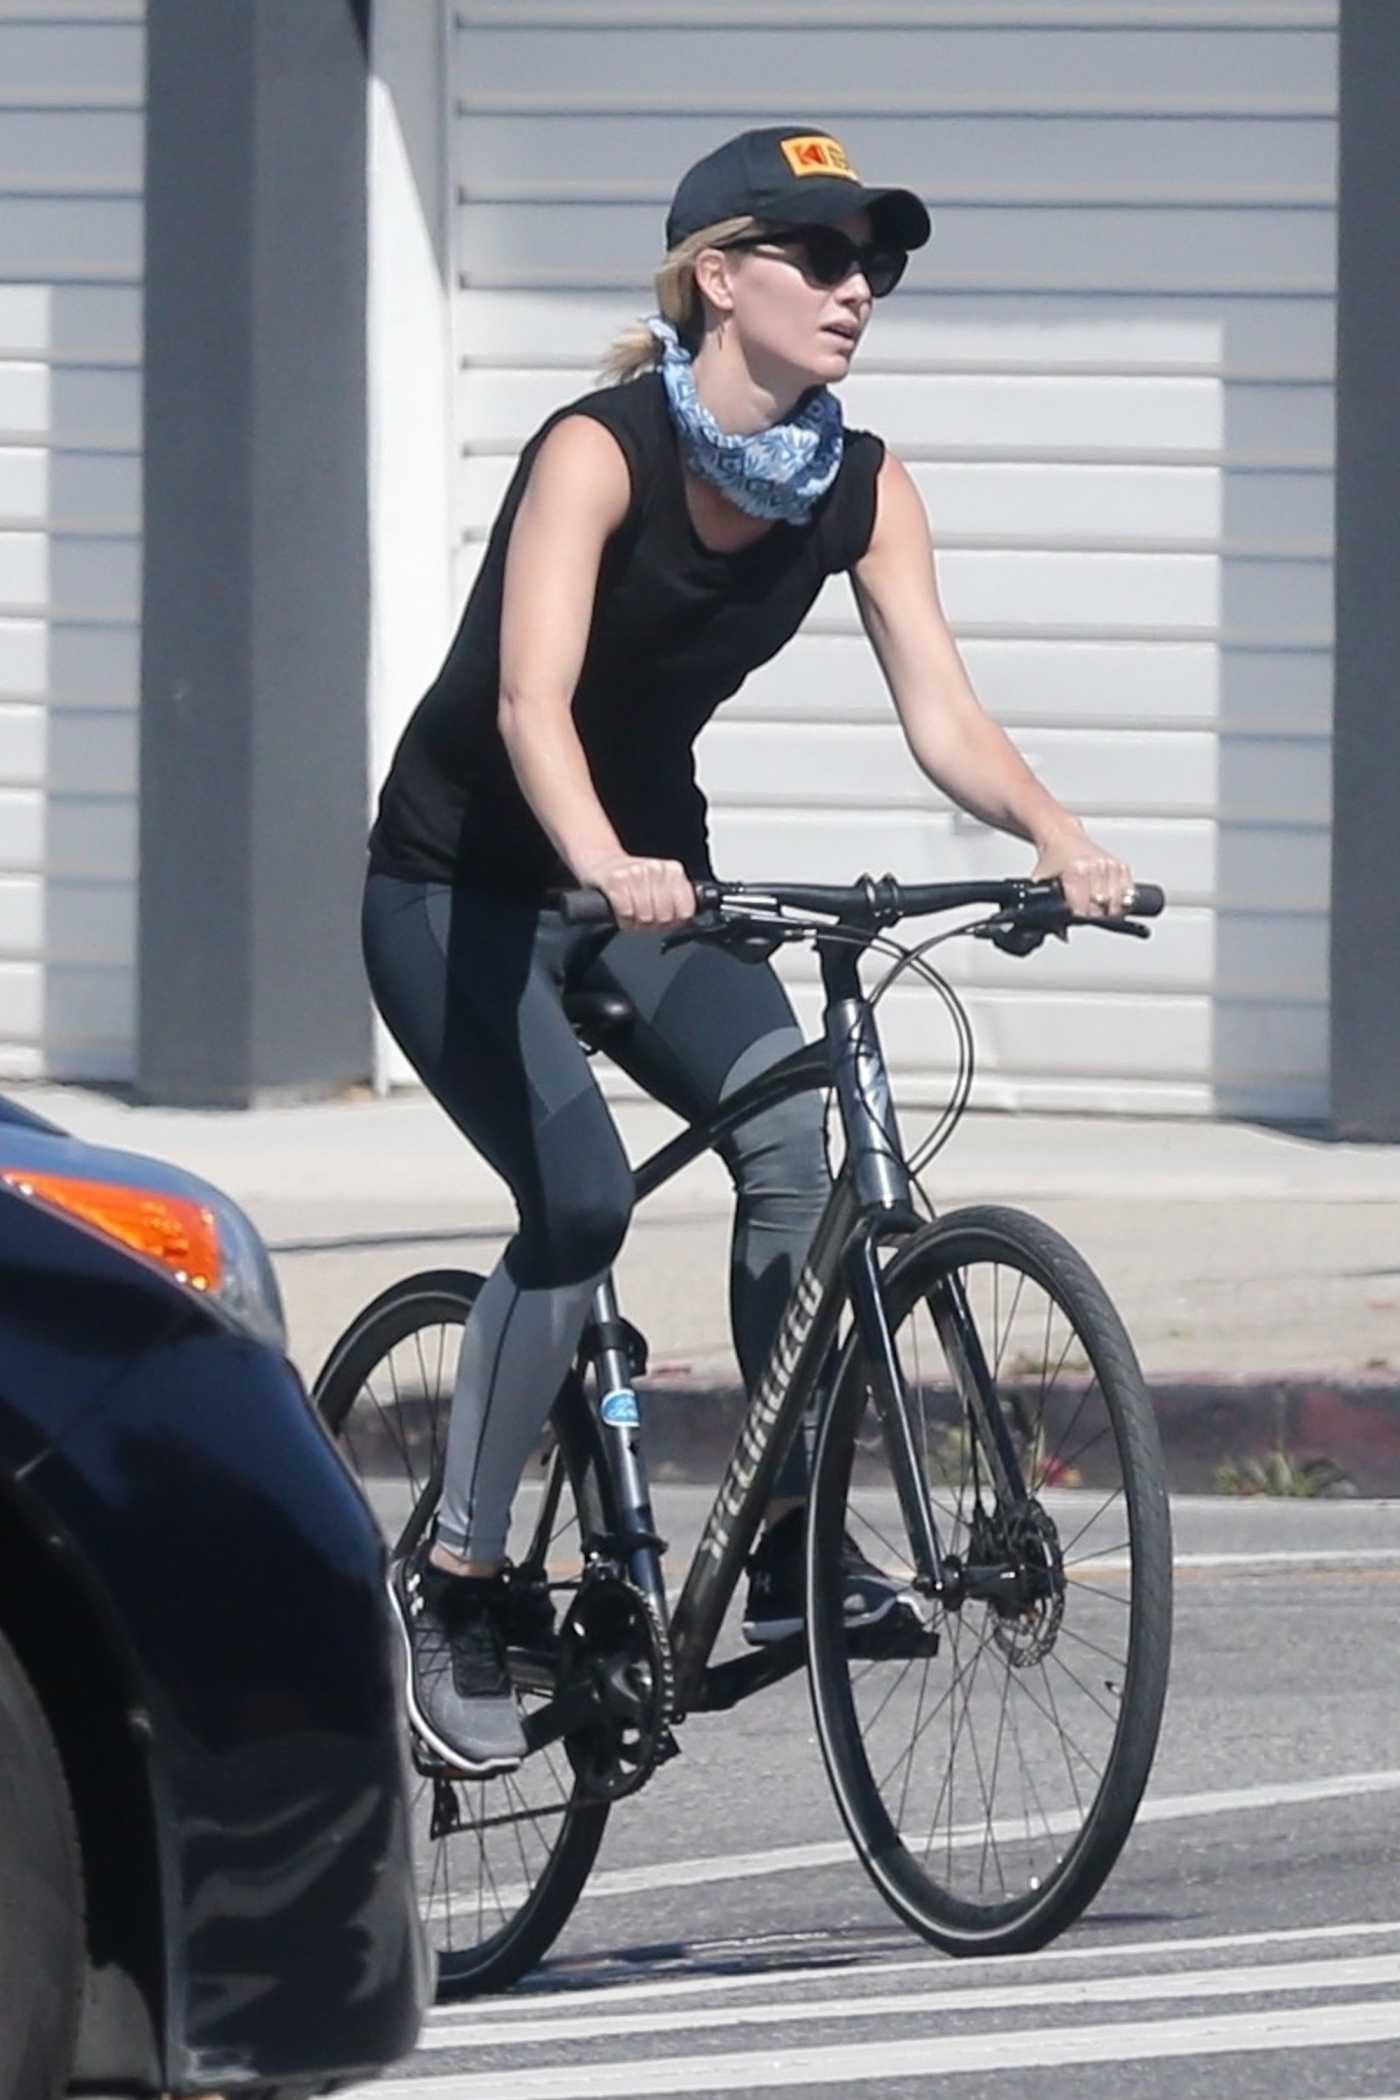 Annabelle Wallis in a Blkack Cap Enjoys a Bicycle Ride in Los Angeles 04/16/2020